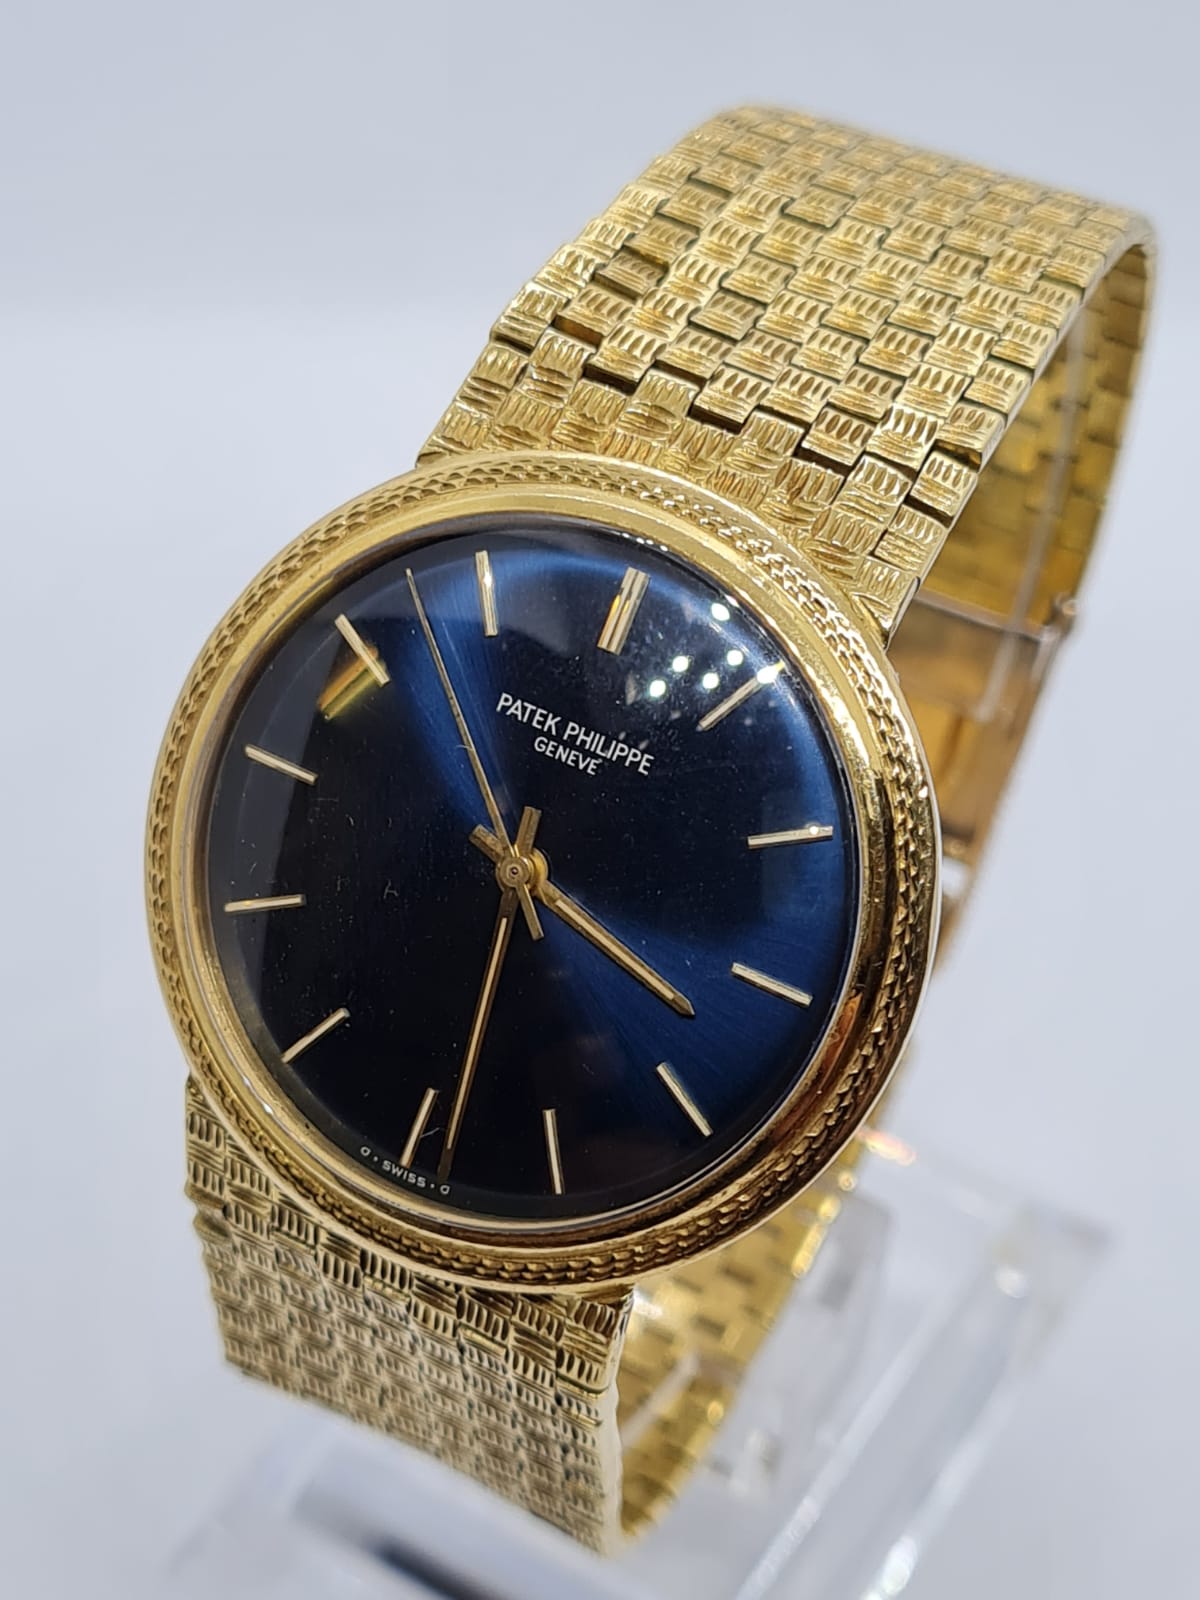 PATEK PHILIPPE GENEVE gent watch with blue face and 18k gold strap,36mm case 1970s model - Image 5 of 17